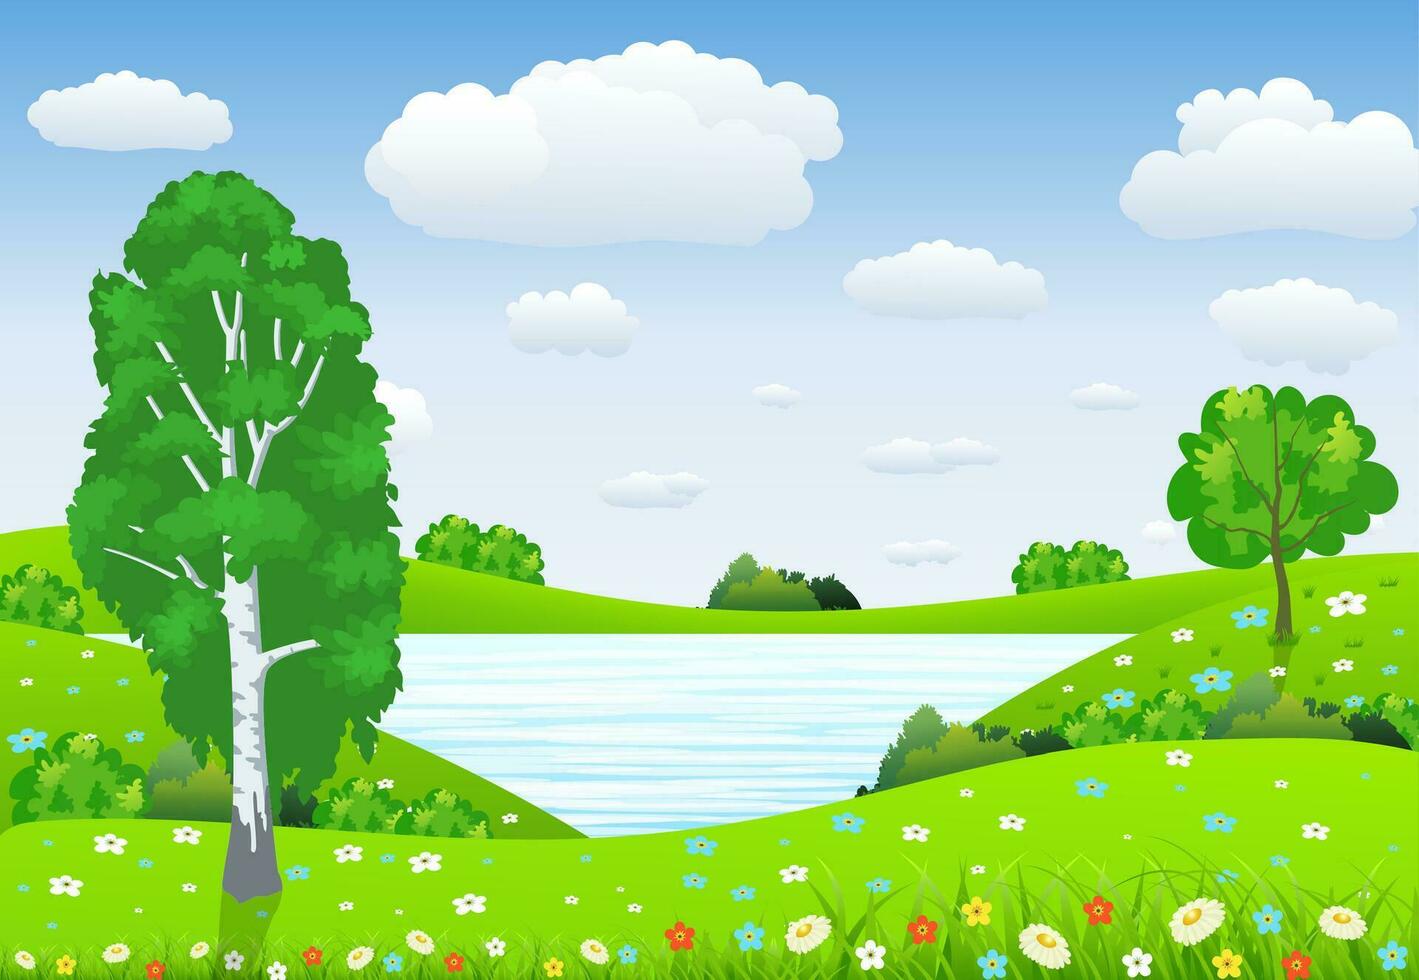 Green Landscape with trees clouds flowers vector